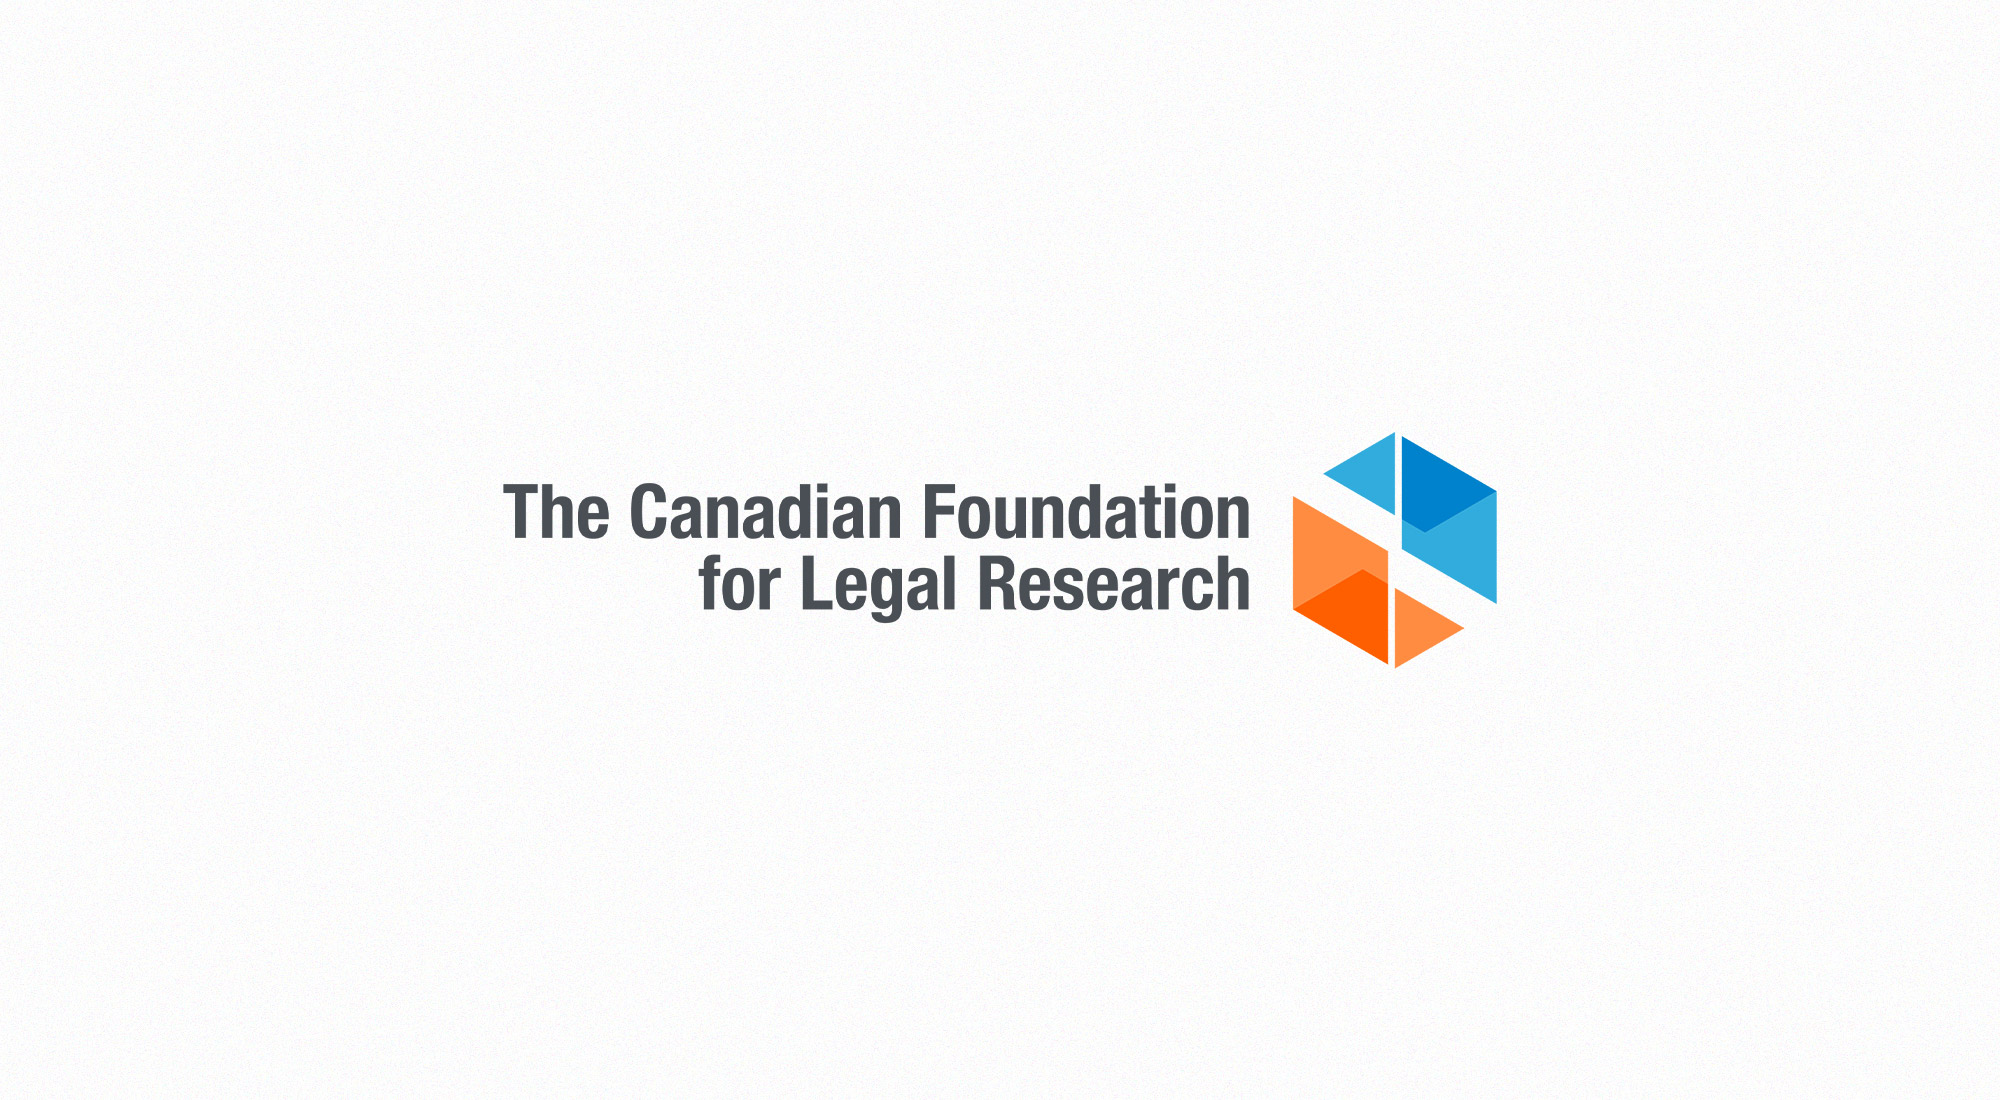 The Canadian Foundation for Legal Research – Corporate Identity